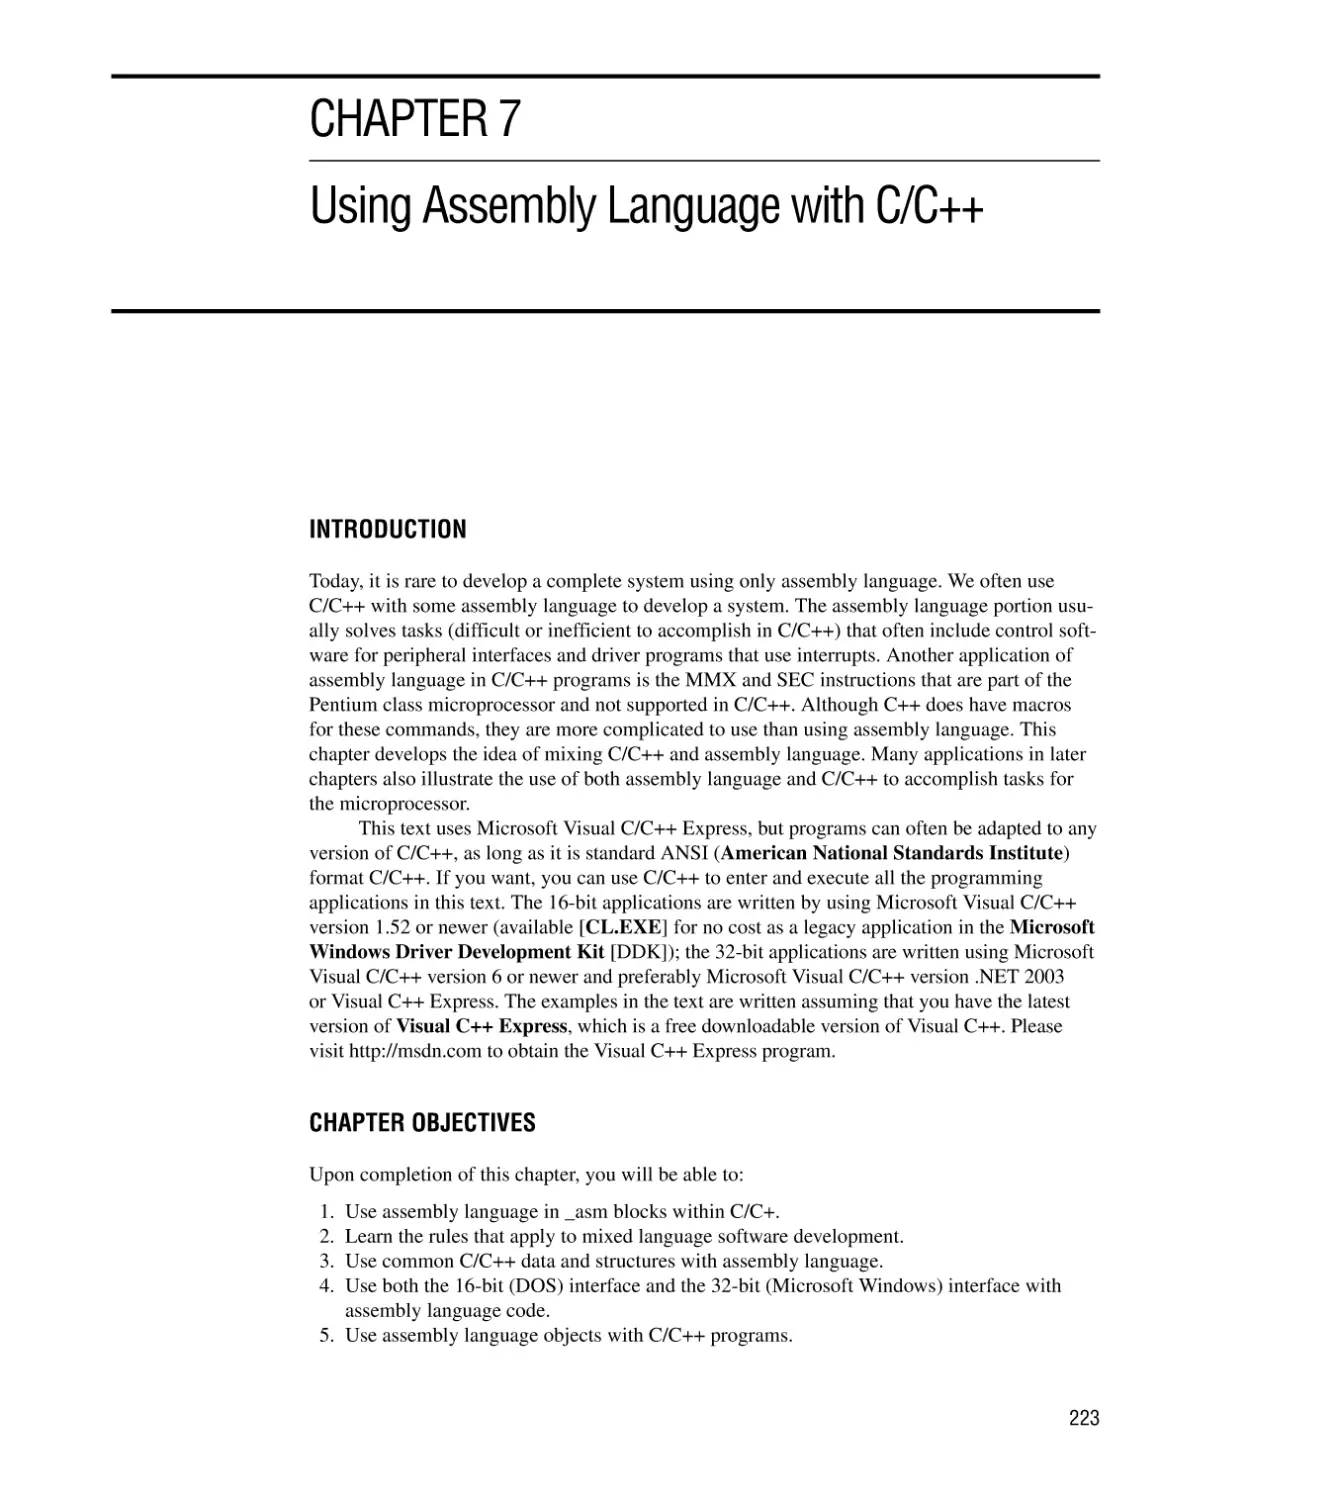 CHAPTER 7 USING ASSEMBLY LANGUAGE WITH C/C++
Introduction/Chapter Objectives